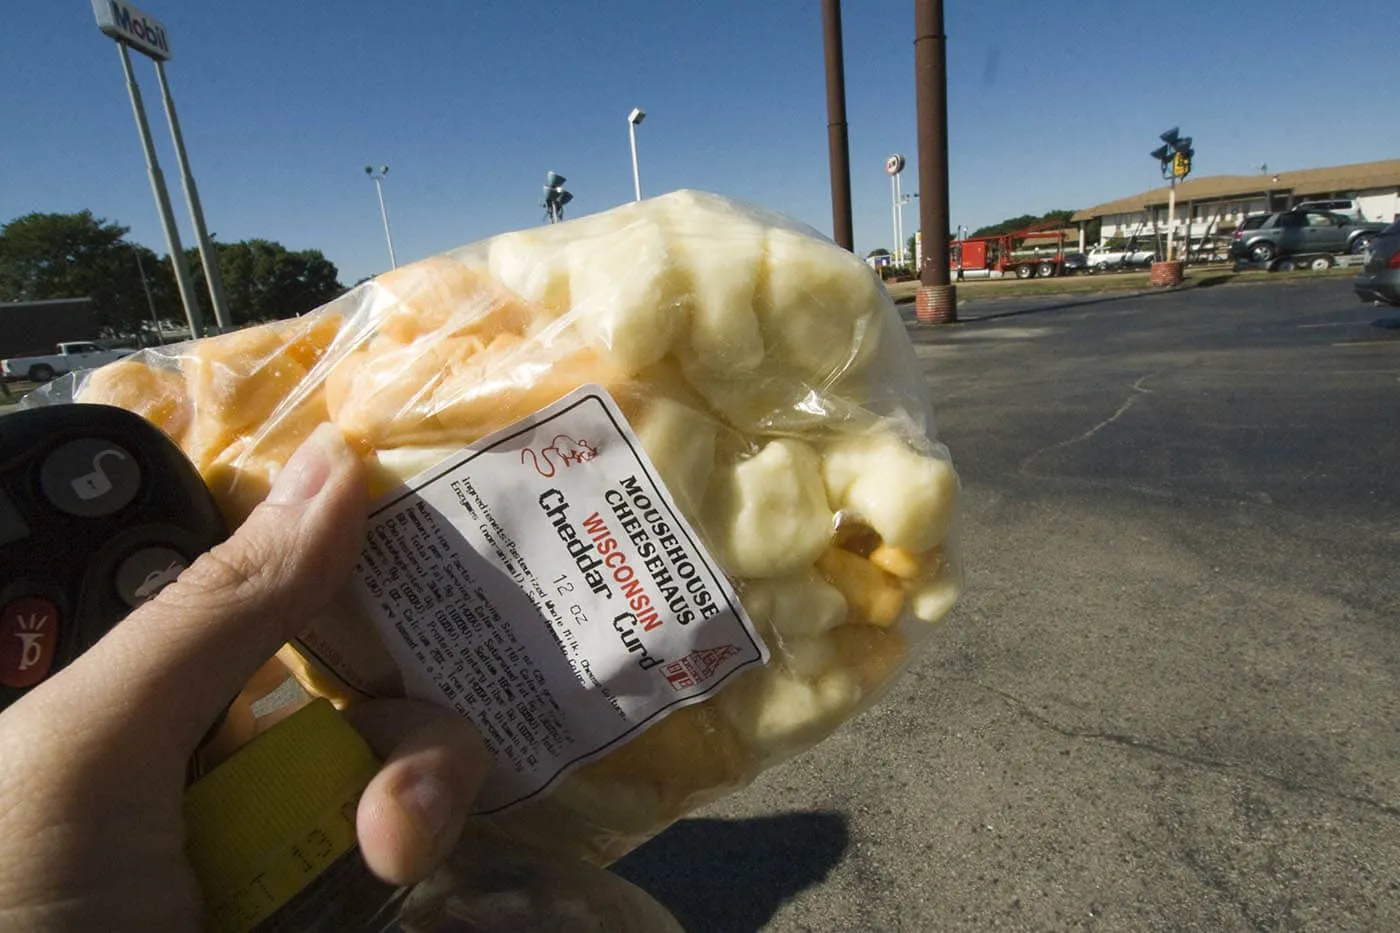 Cheese curds from Mousehouse Cheesehaus in Windsor, Wisconsin -- Roadside Attractions in Wisconsin